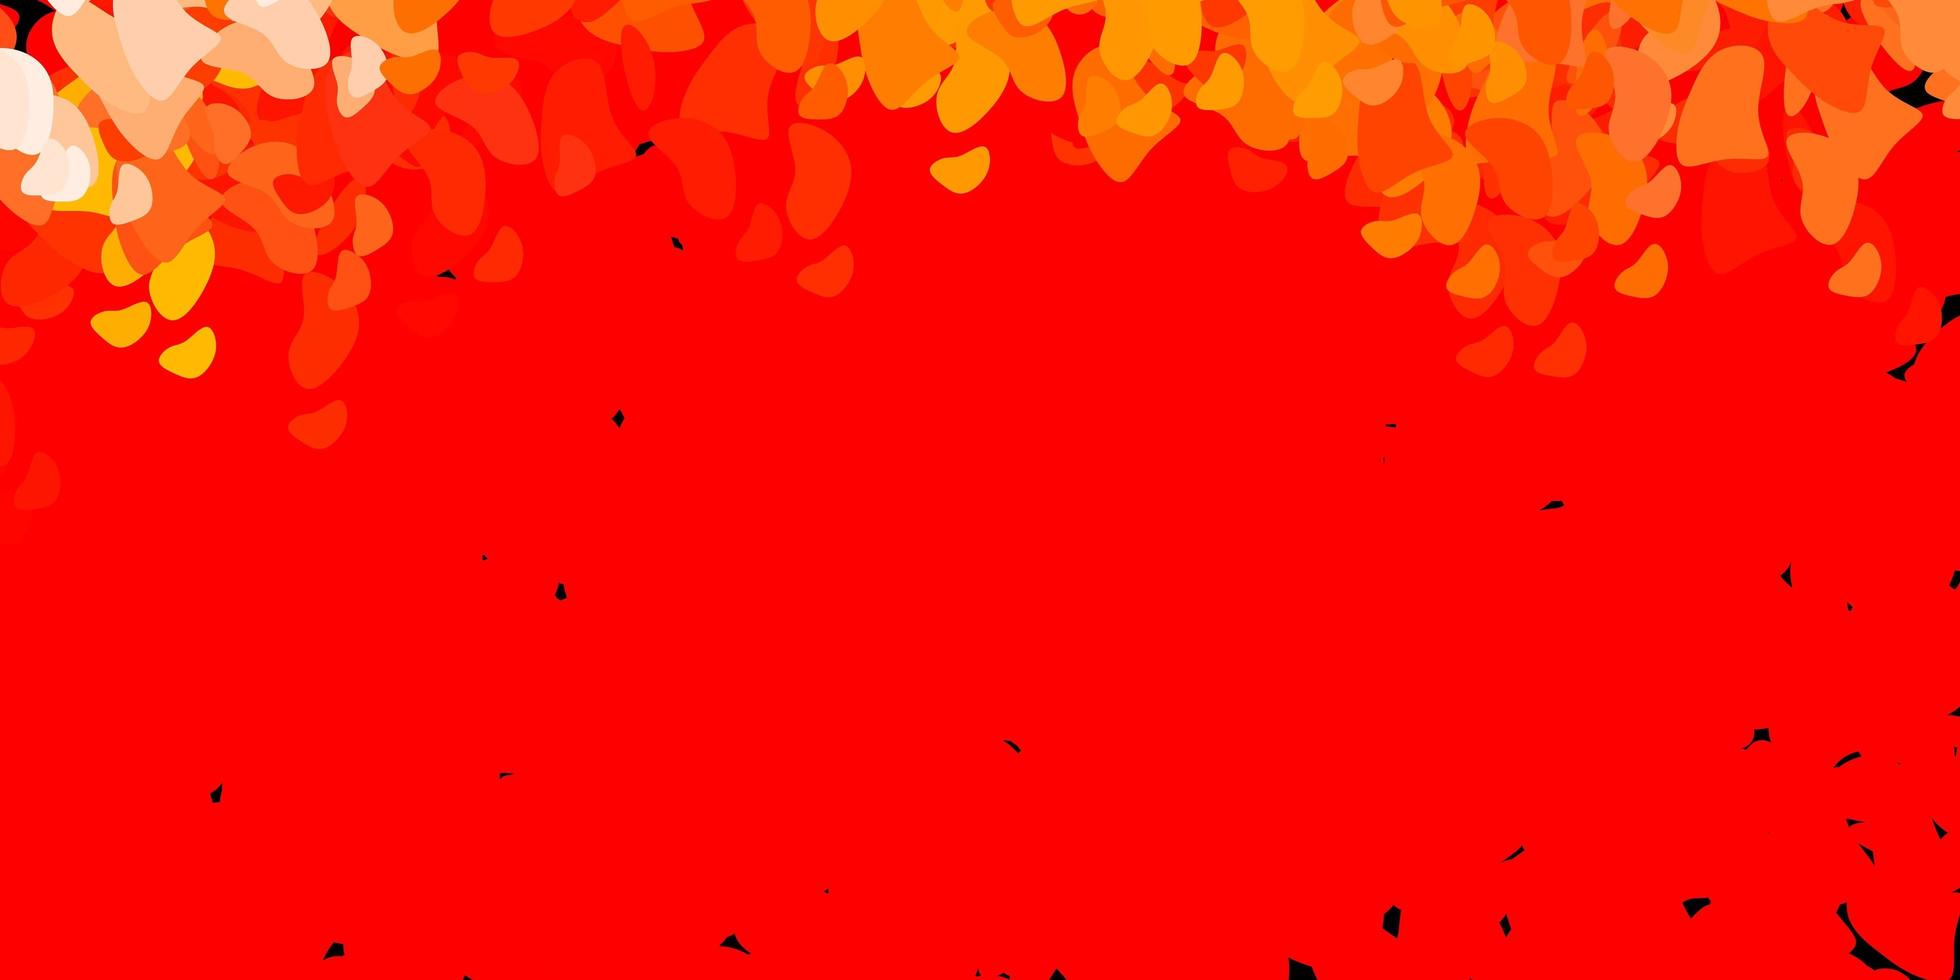 Light red vector background with random forms.